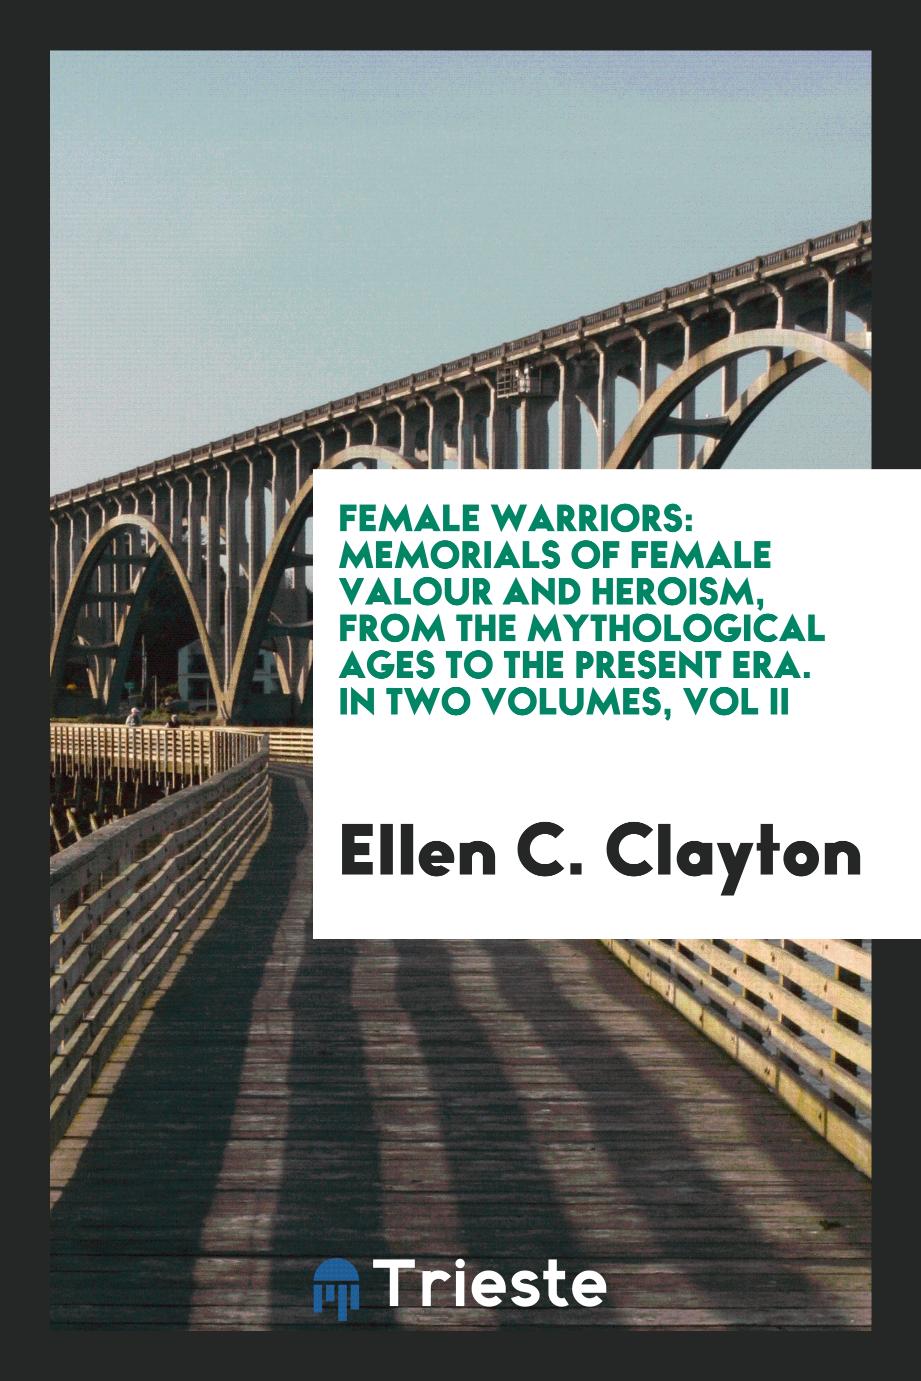 Female warriors: memorials of female valour and heroism, from the mythological ages to the present era. In Two Volumes, Vol II